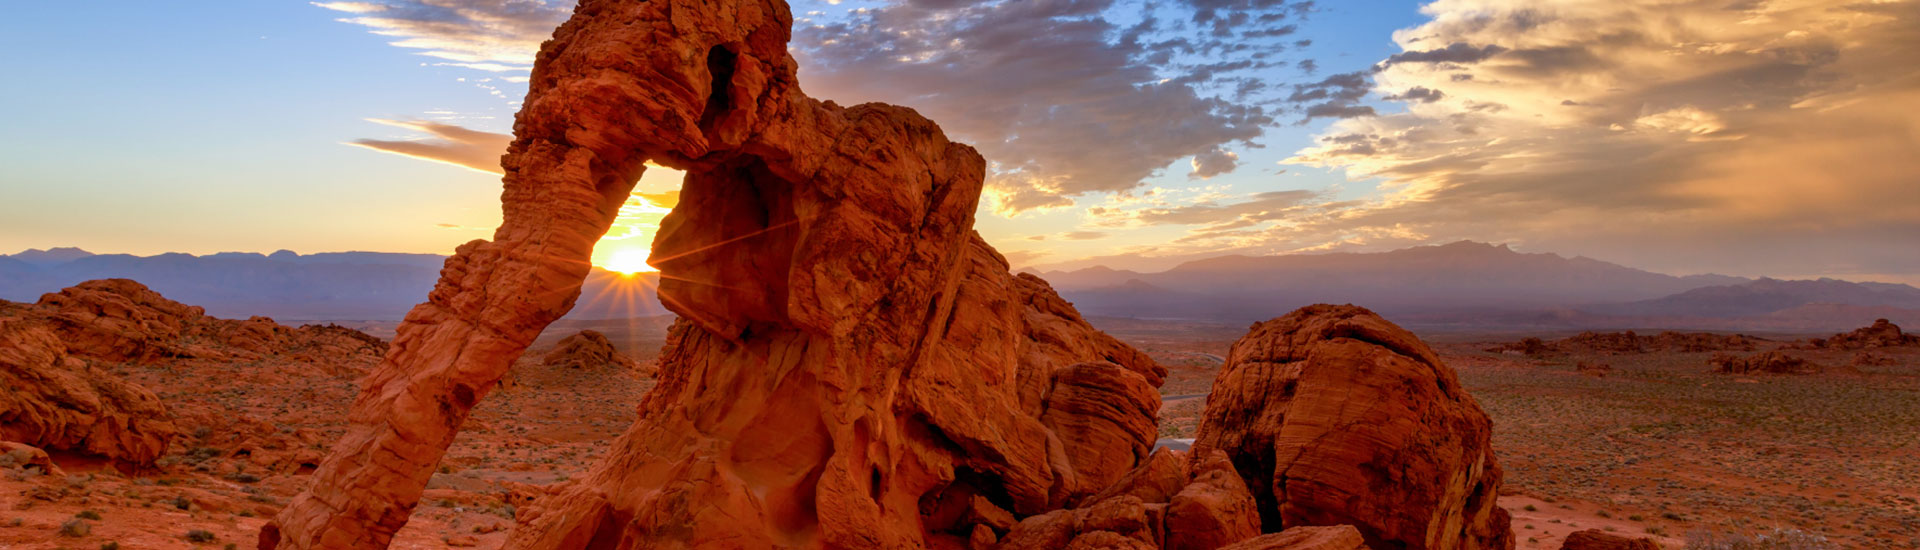 Golden sun setting against a violet blue sky behind Elephant Rock at Valley of Fire State Park, Nevada.